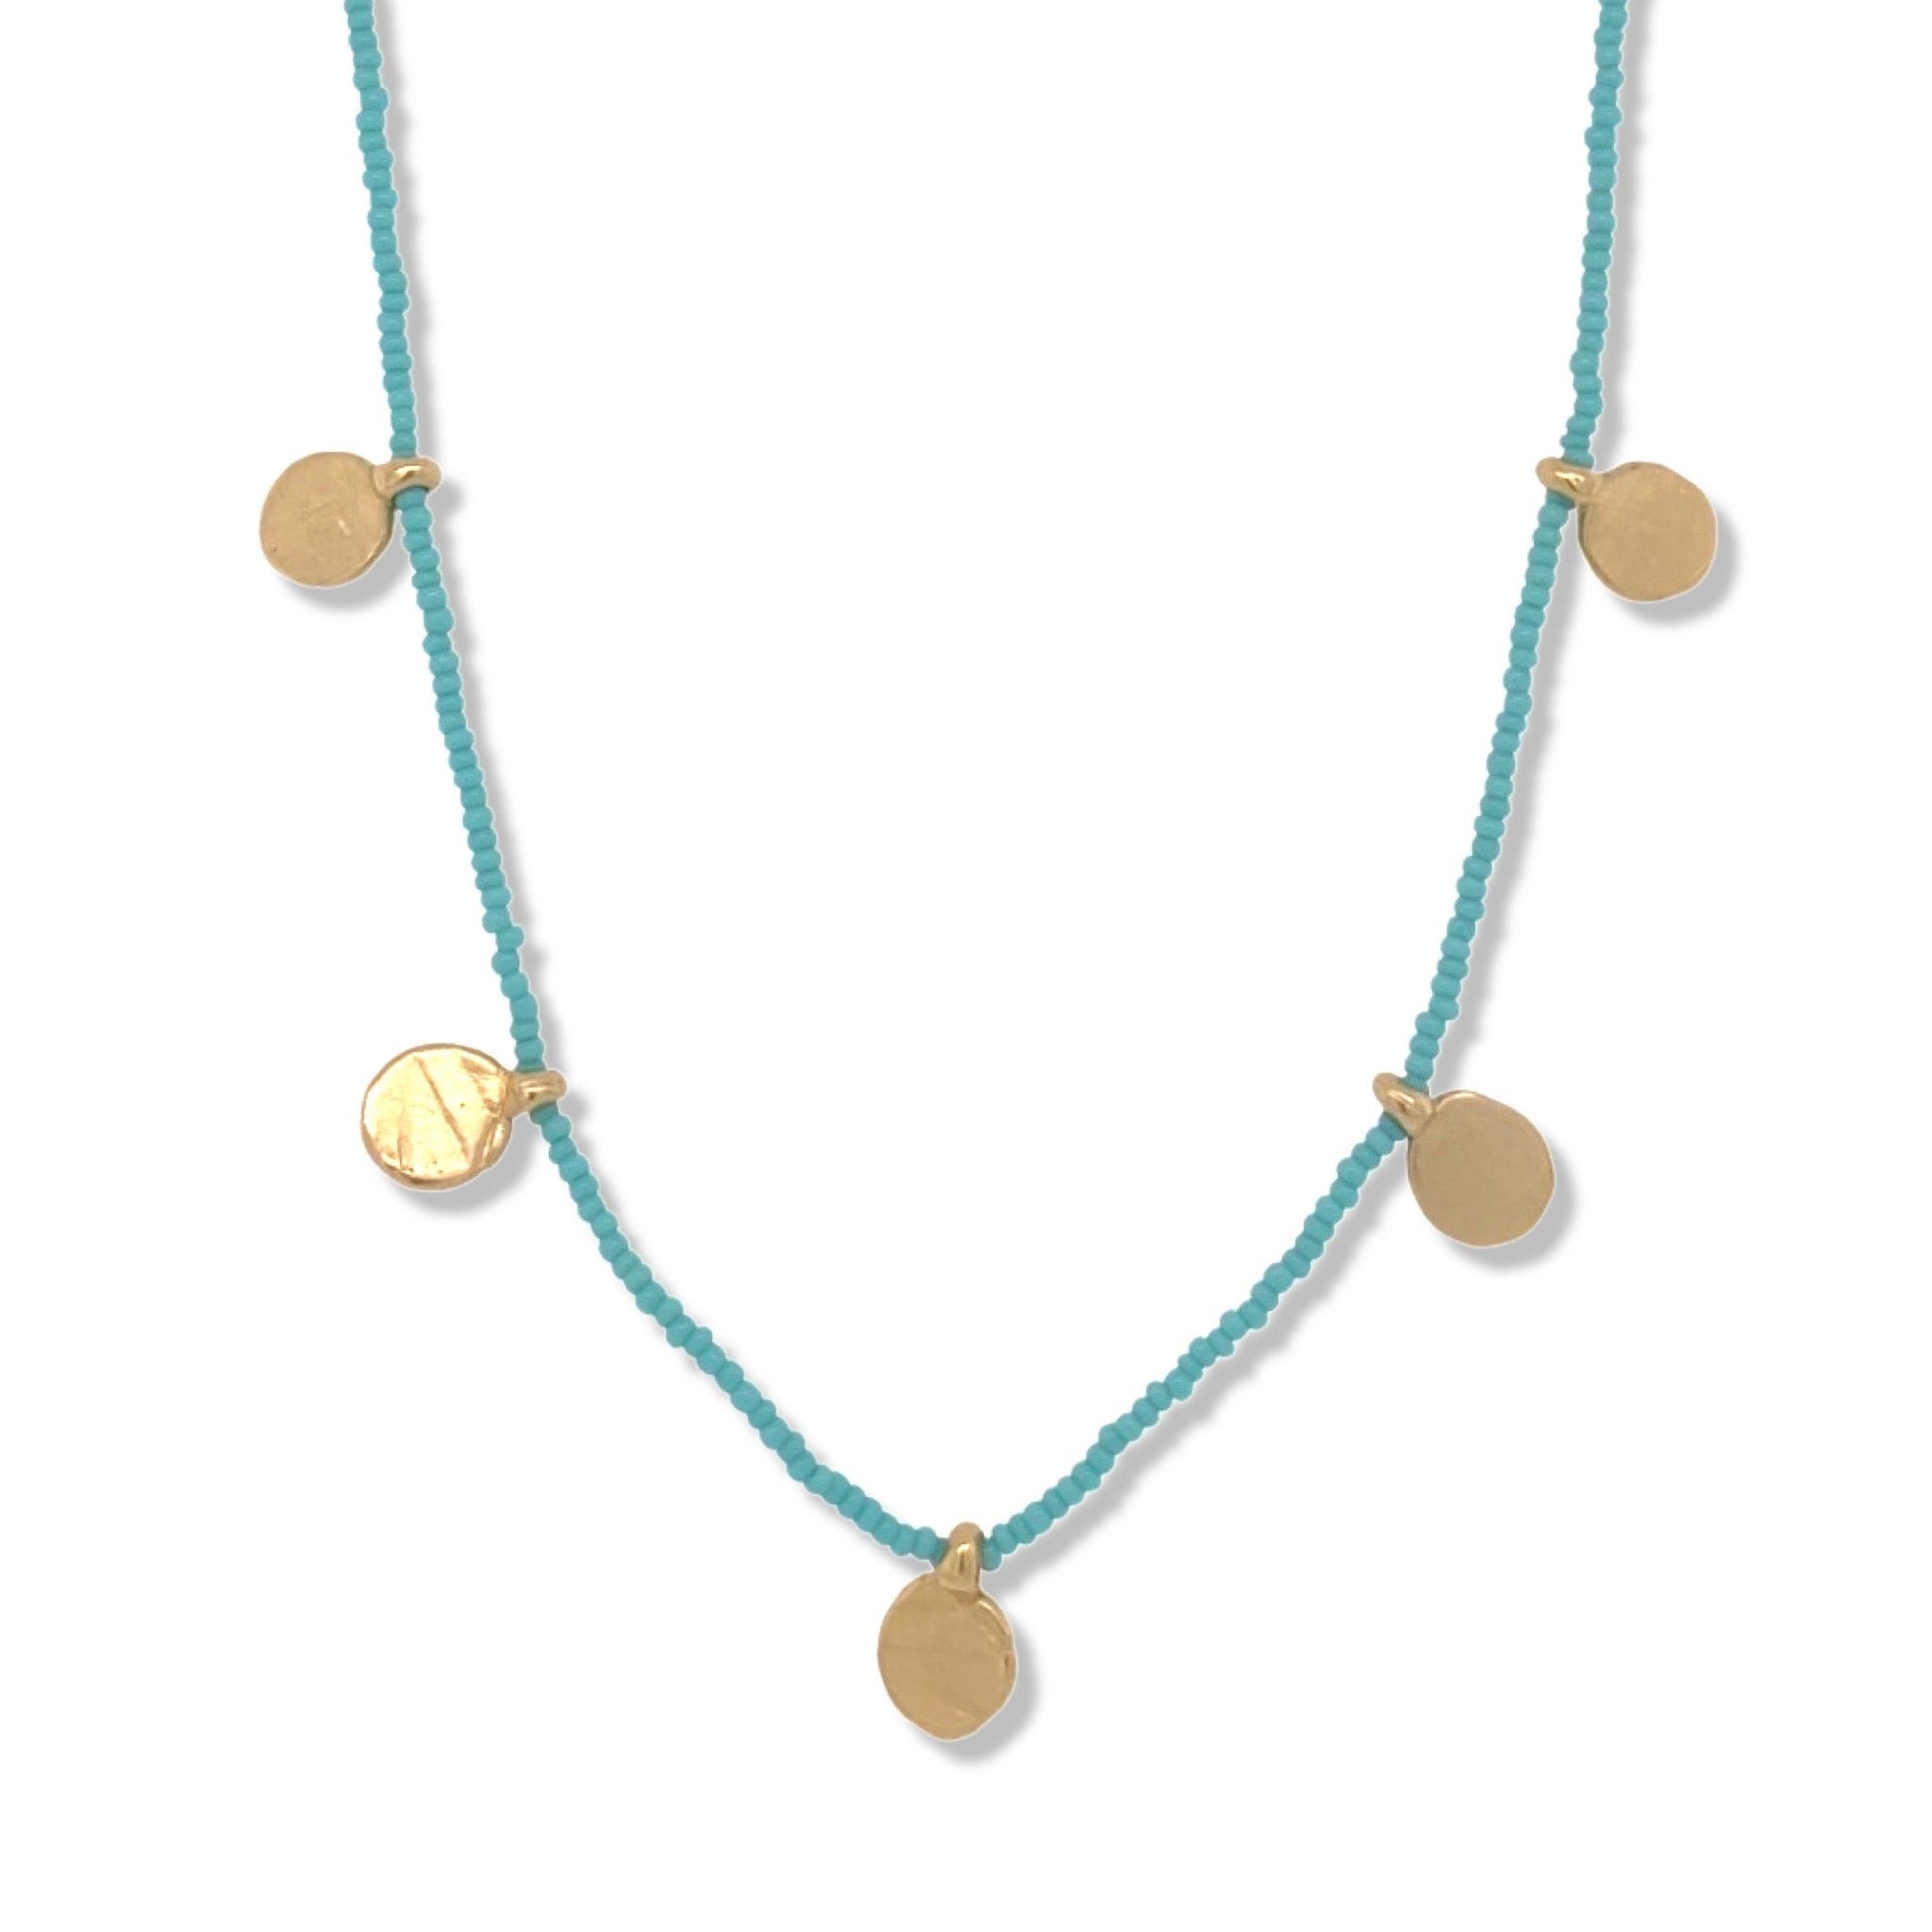 Dot Charm Necklace in Gold on Turquoise Beads | Nalu | Nantucket